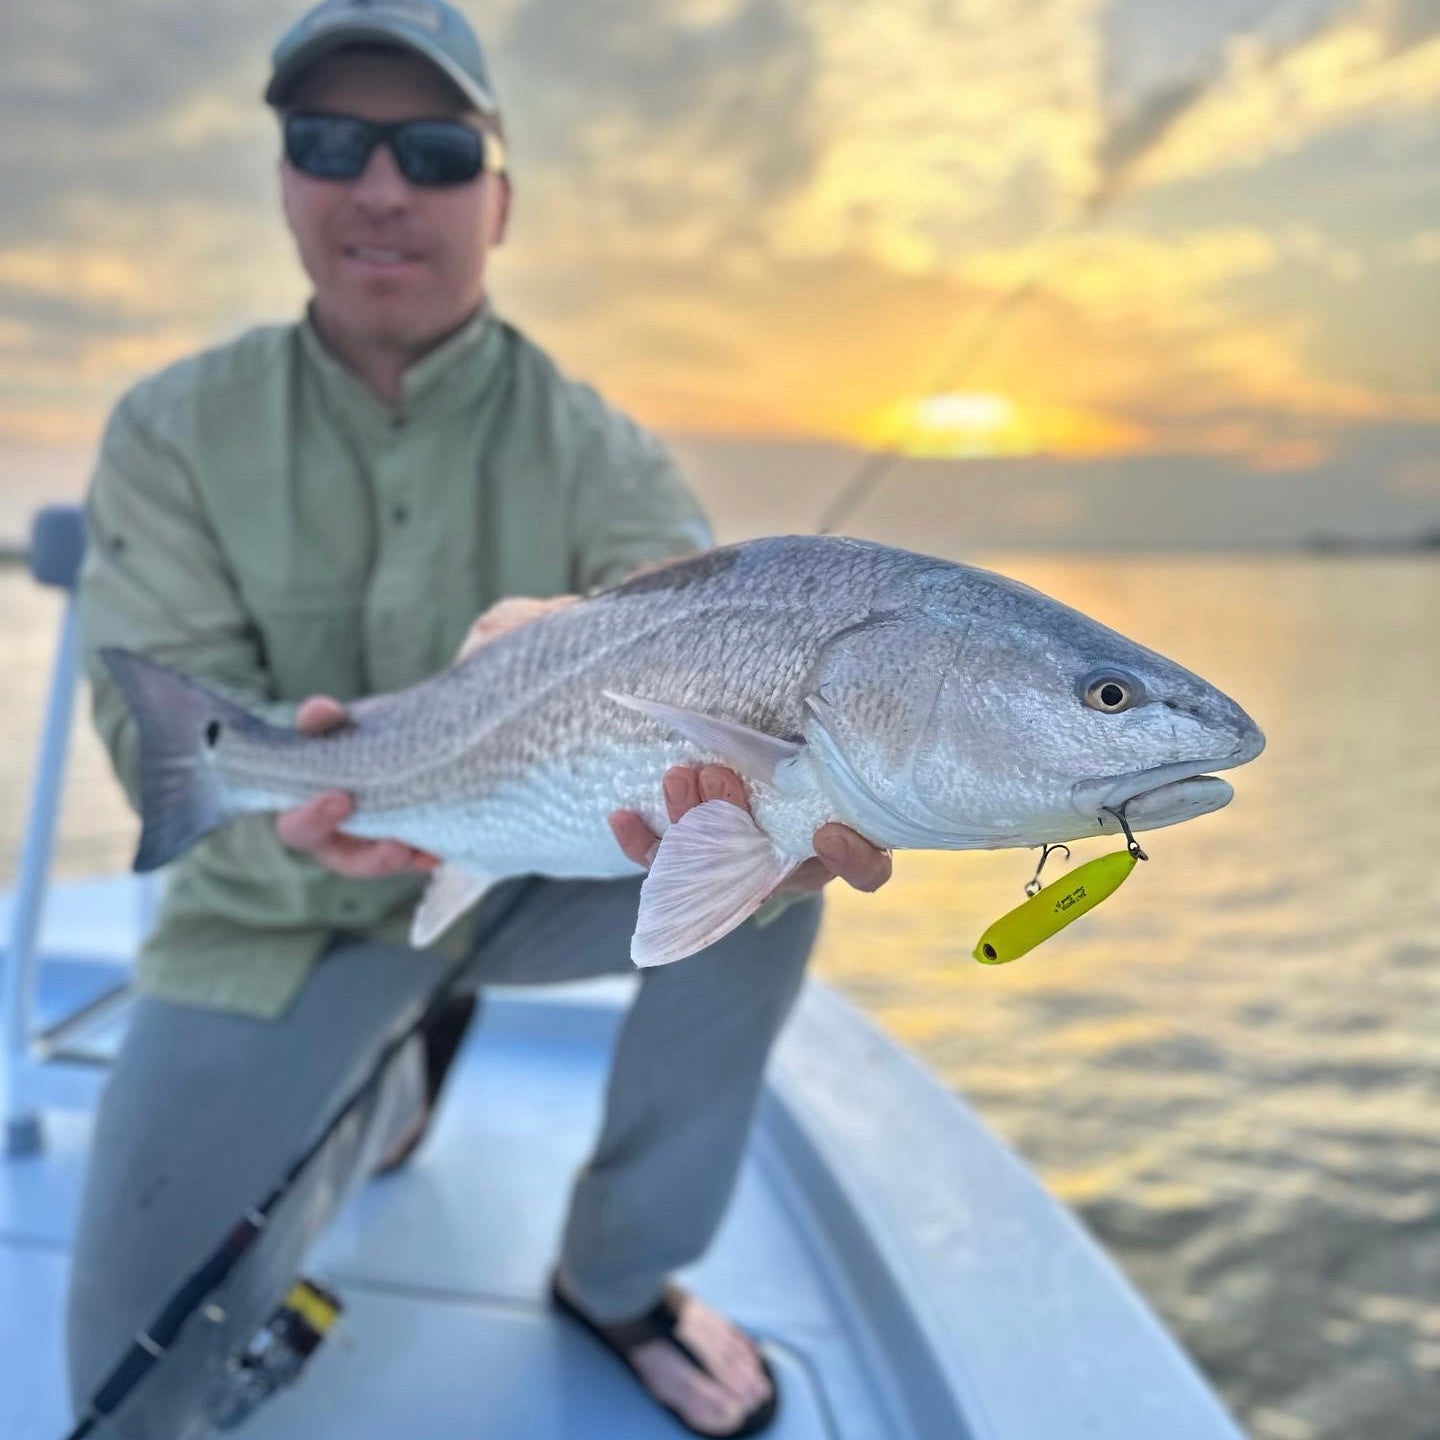 Some solid inshore action going on right now!